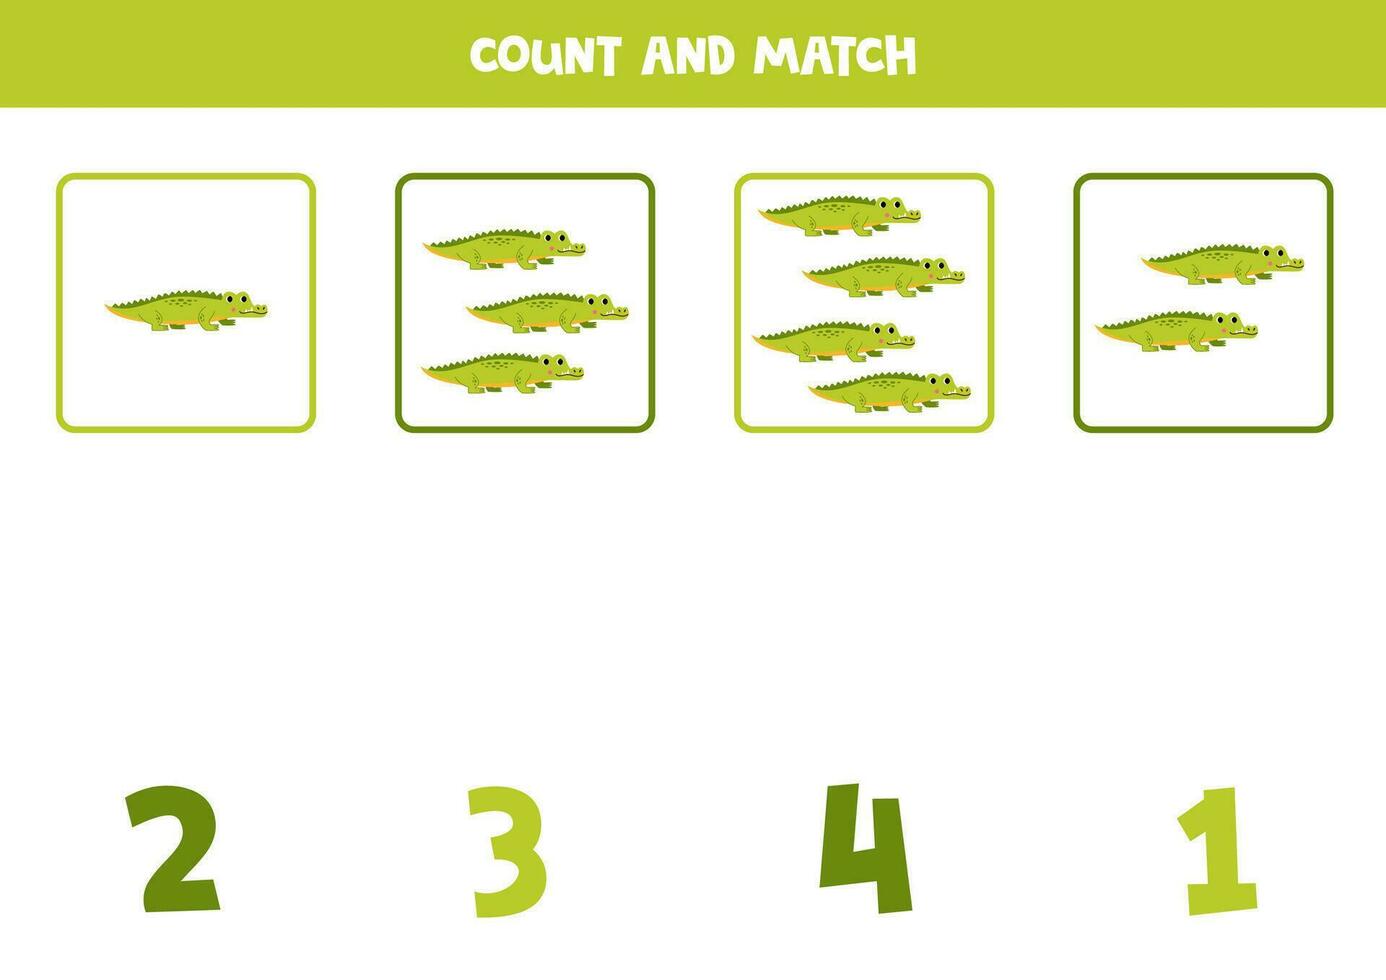 Counting game for kids. Count all crocodiles and match with numbers. Worksheet for children. vector